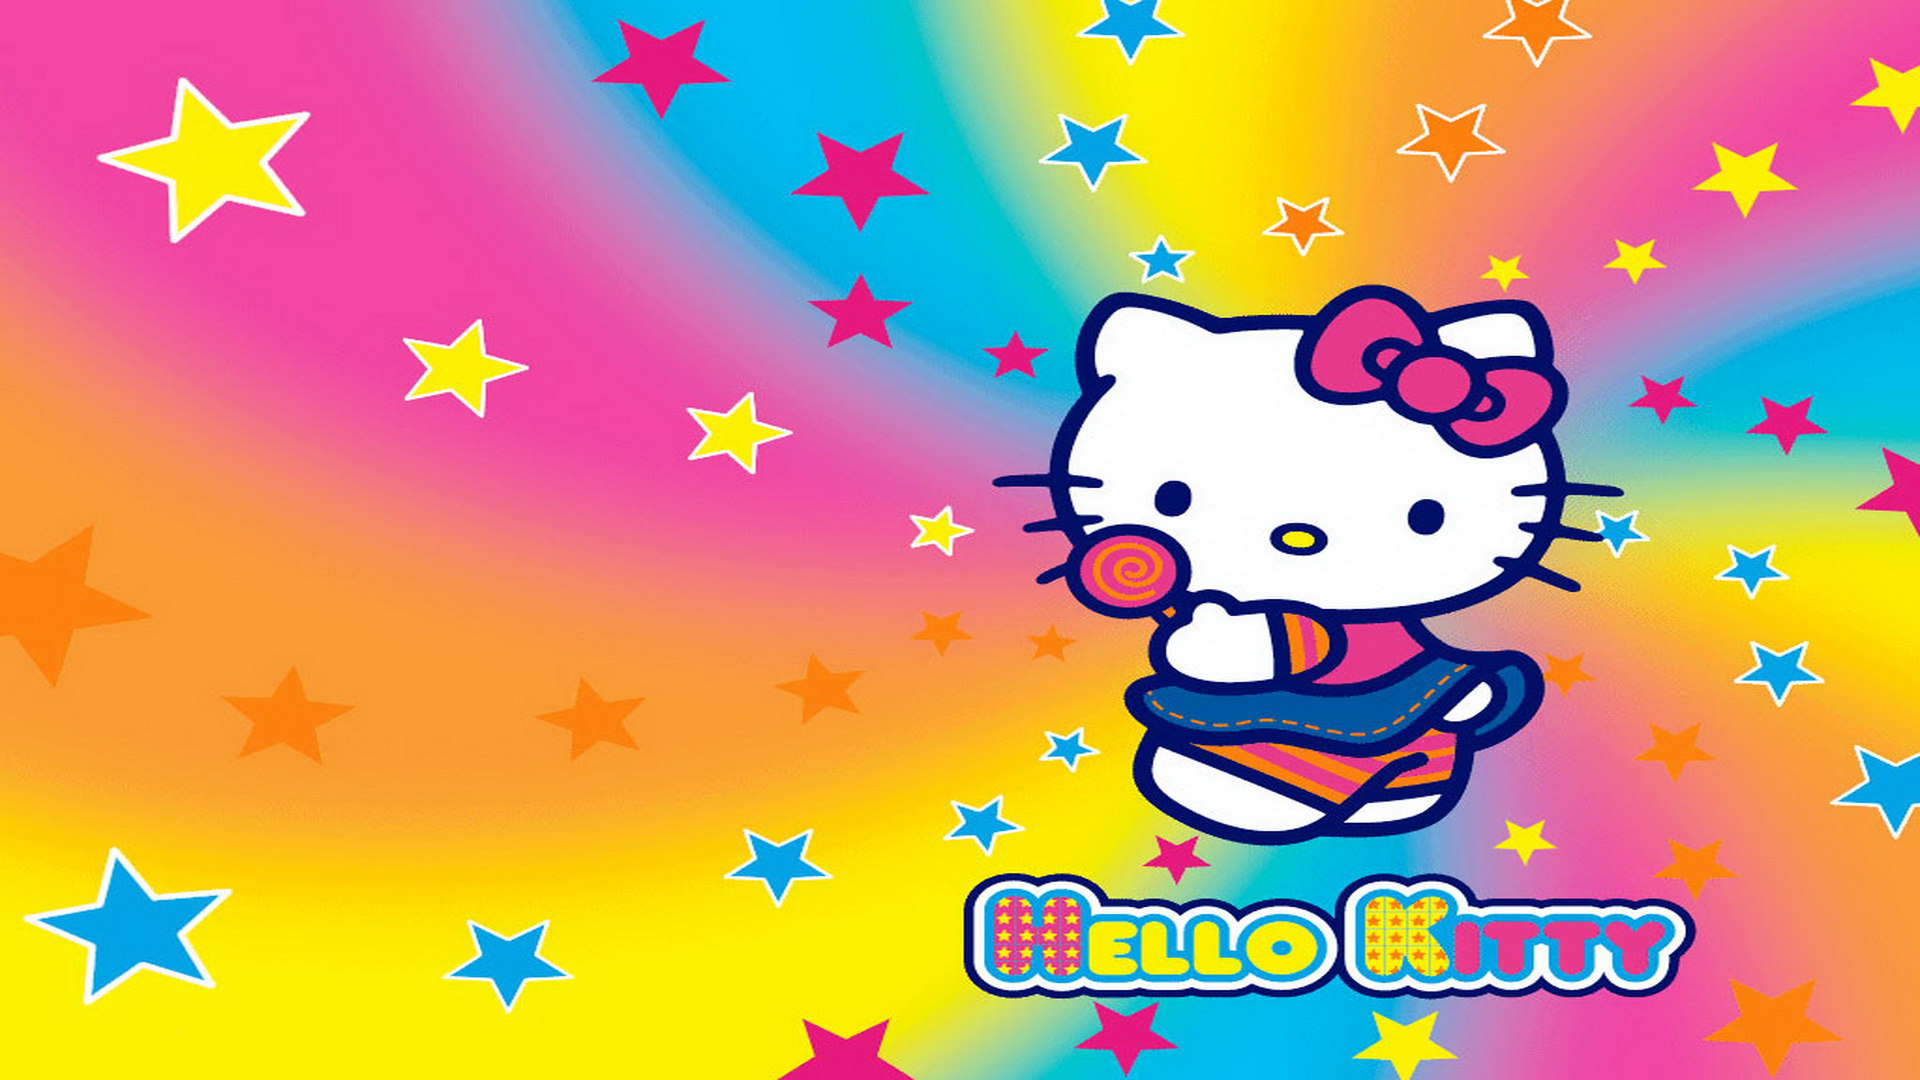 Related To Hello Kitty Wallpaper